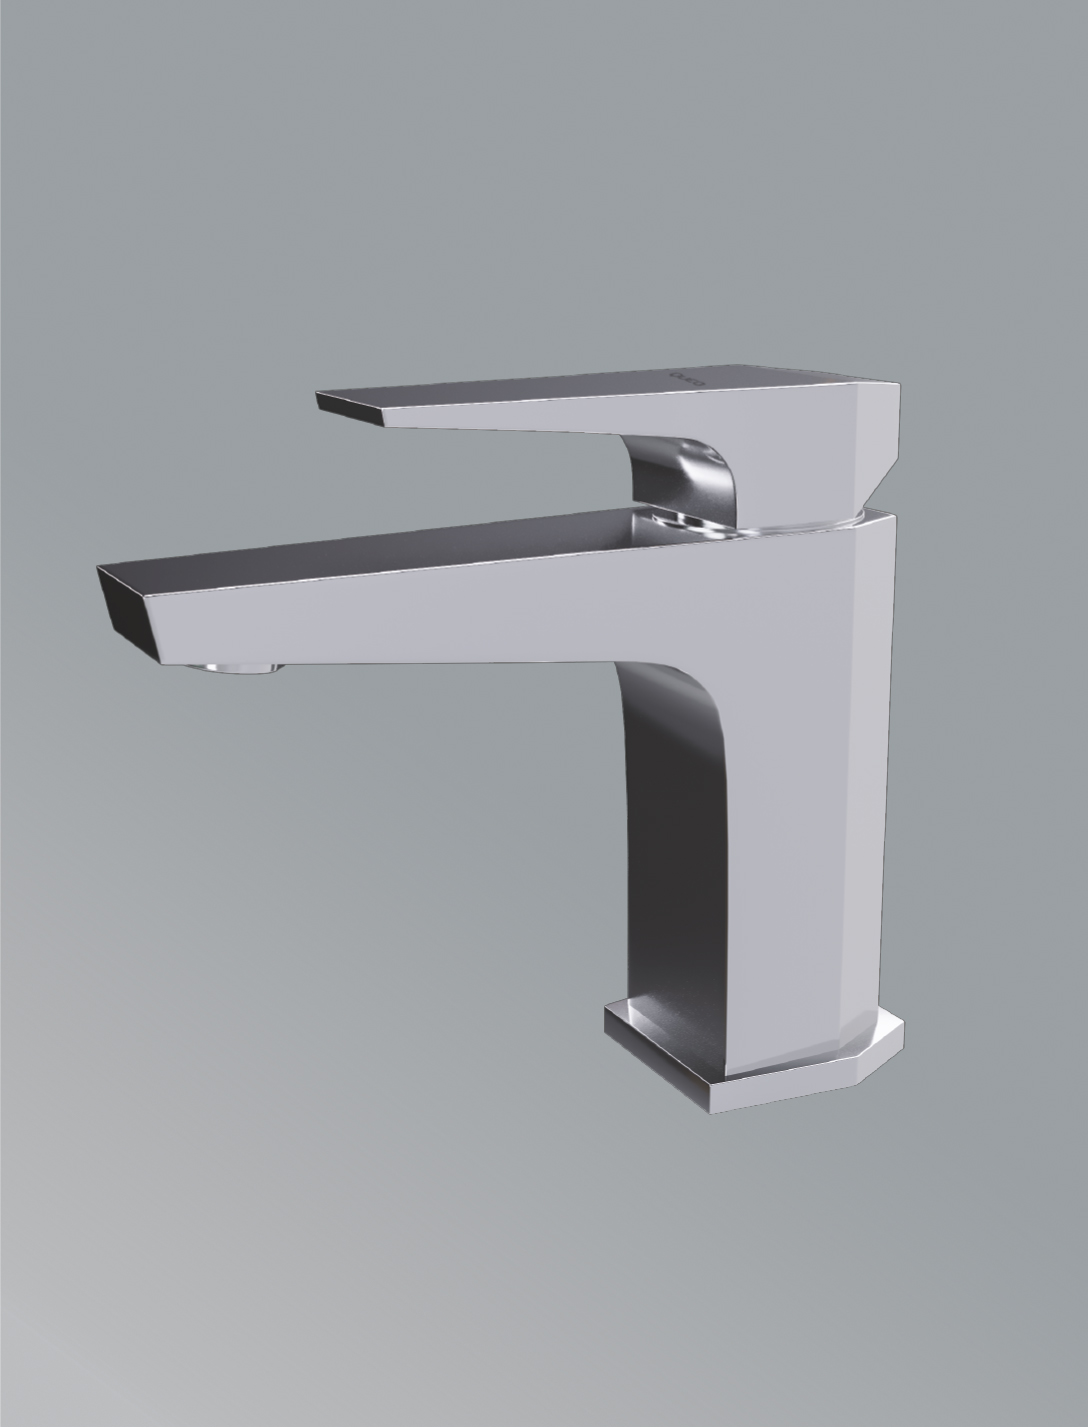  Single Control basin faucet in polished chrome